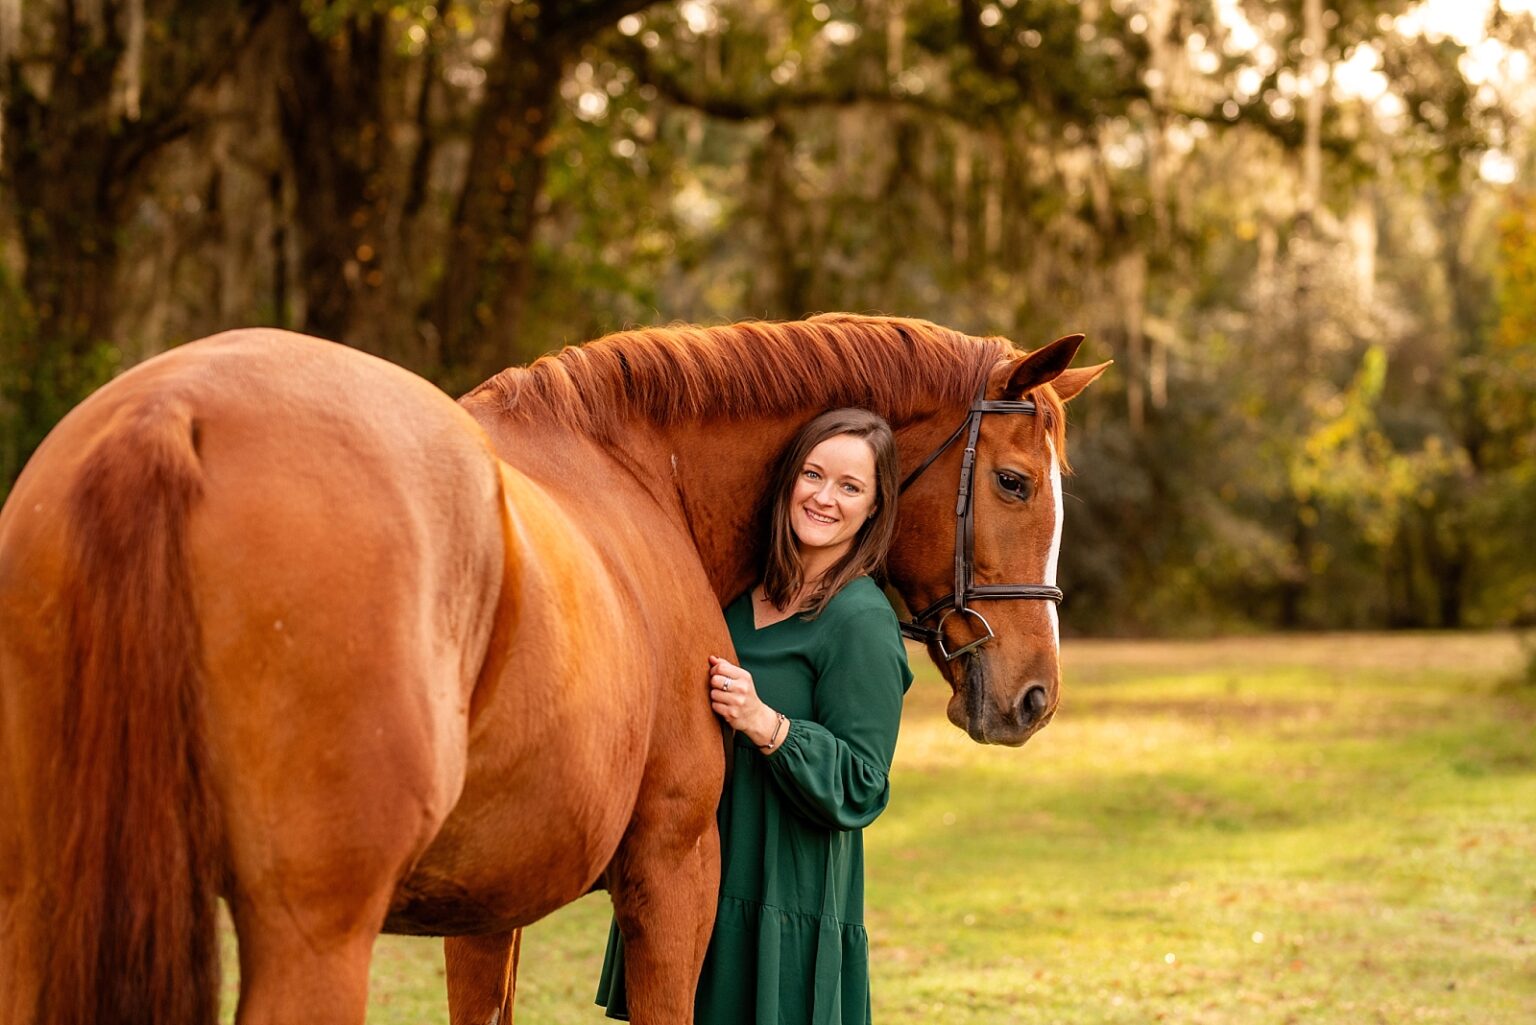 Horse and rider portrait photographer in Florida and the southeast. Photos with your horse. Posing ideas for photos with your horse. Tallahassee, FL. Cavallo Farms.